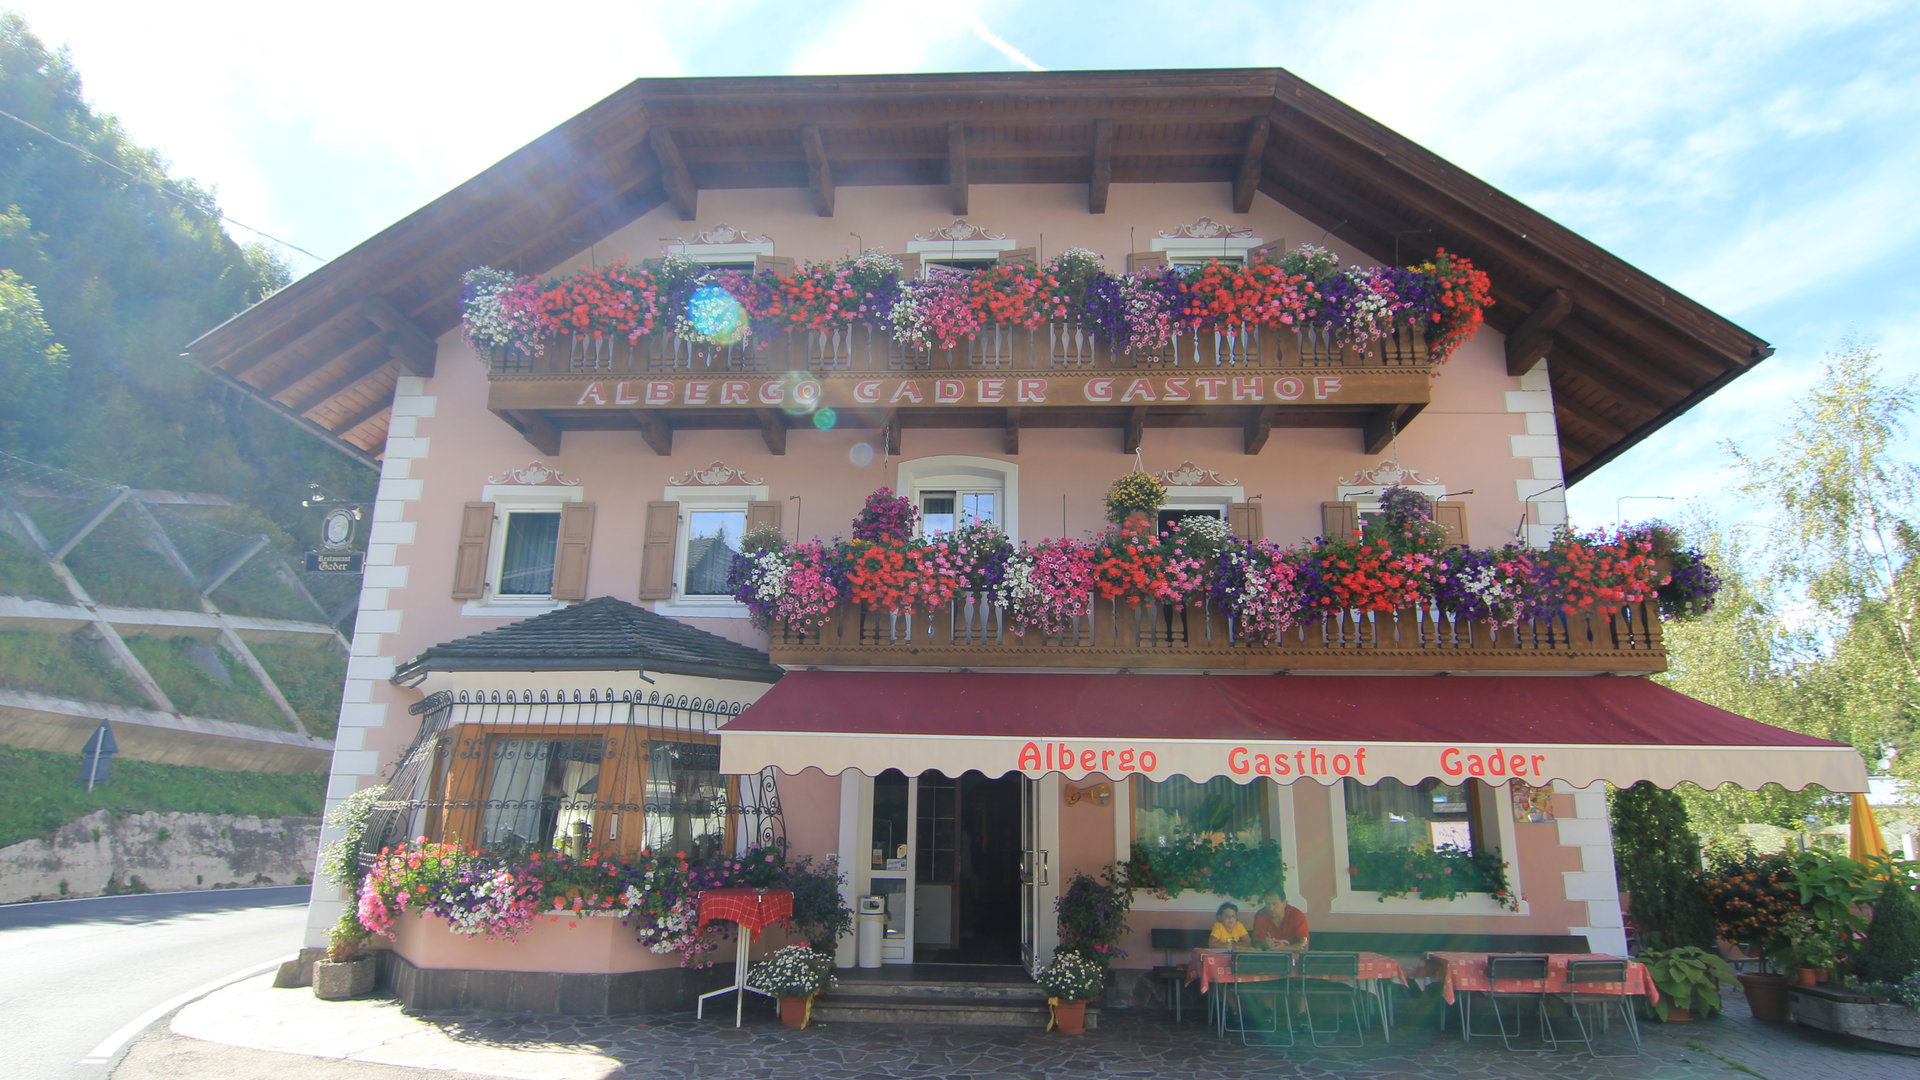 Our albergo with flowers at the balcony